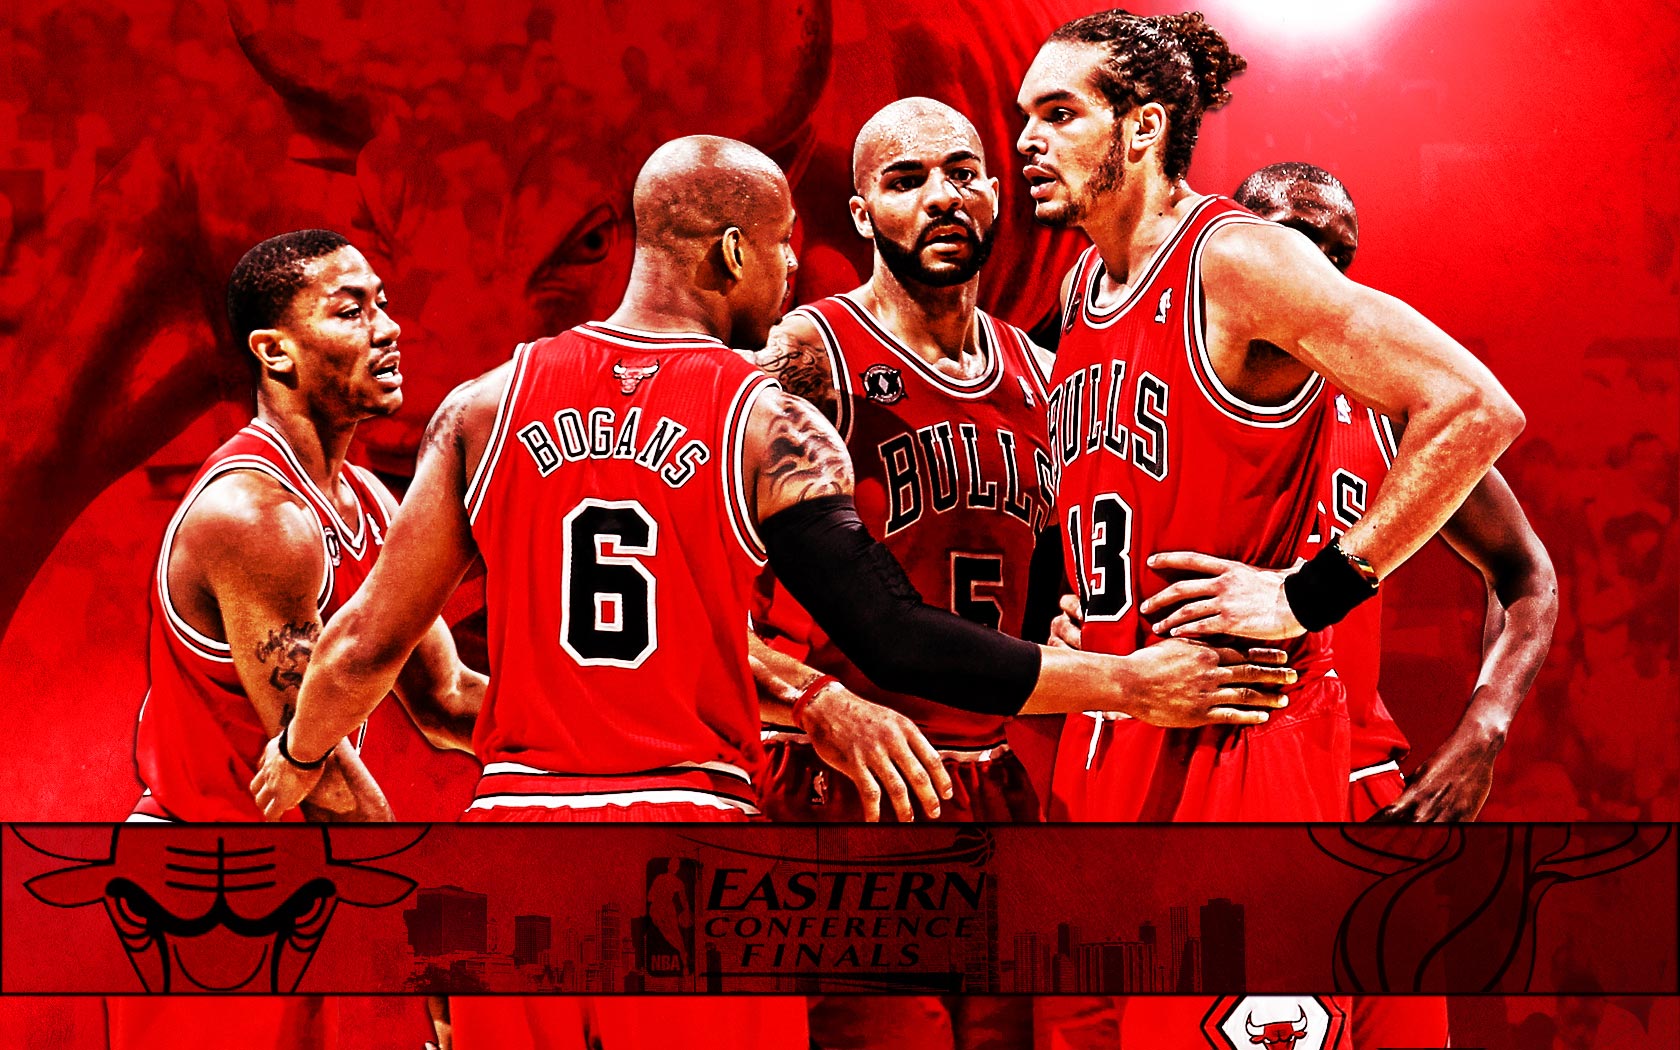 nba wallpapers,basketball player,red,team,player,jersey